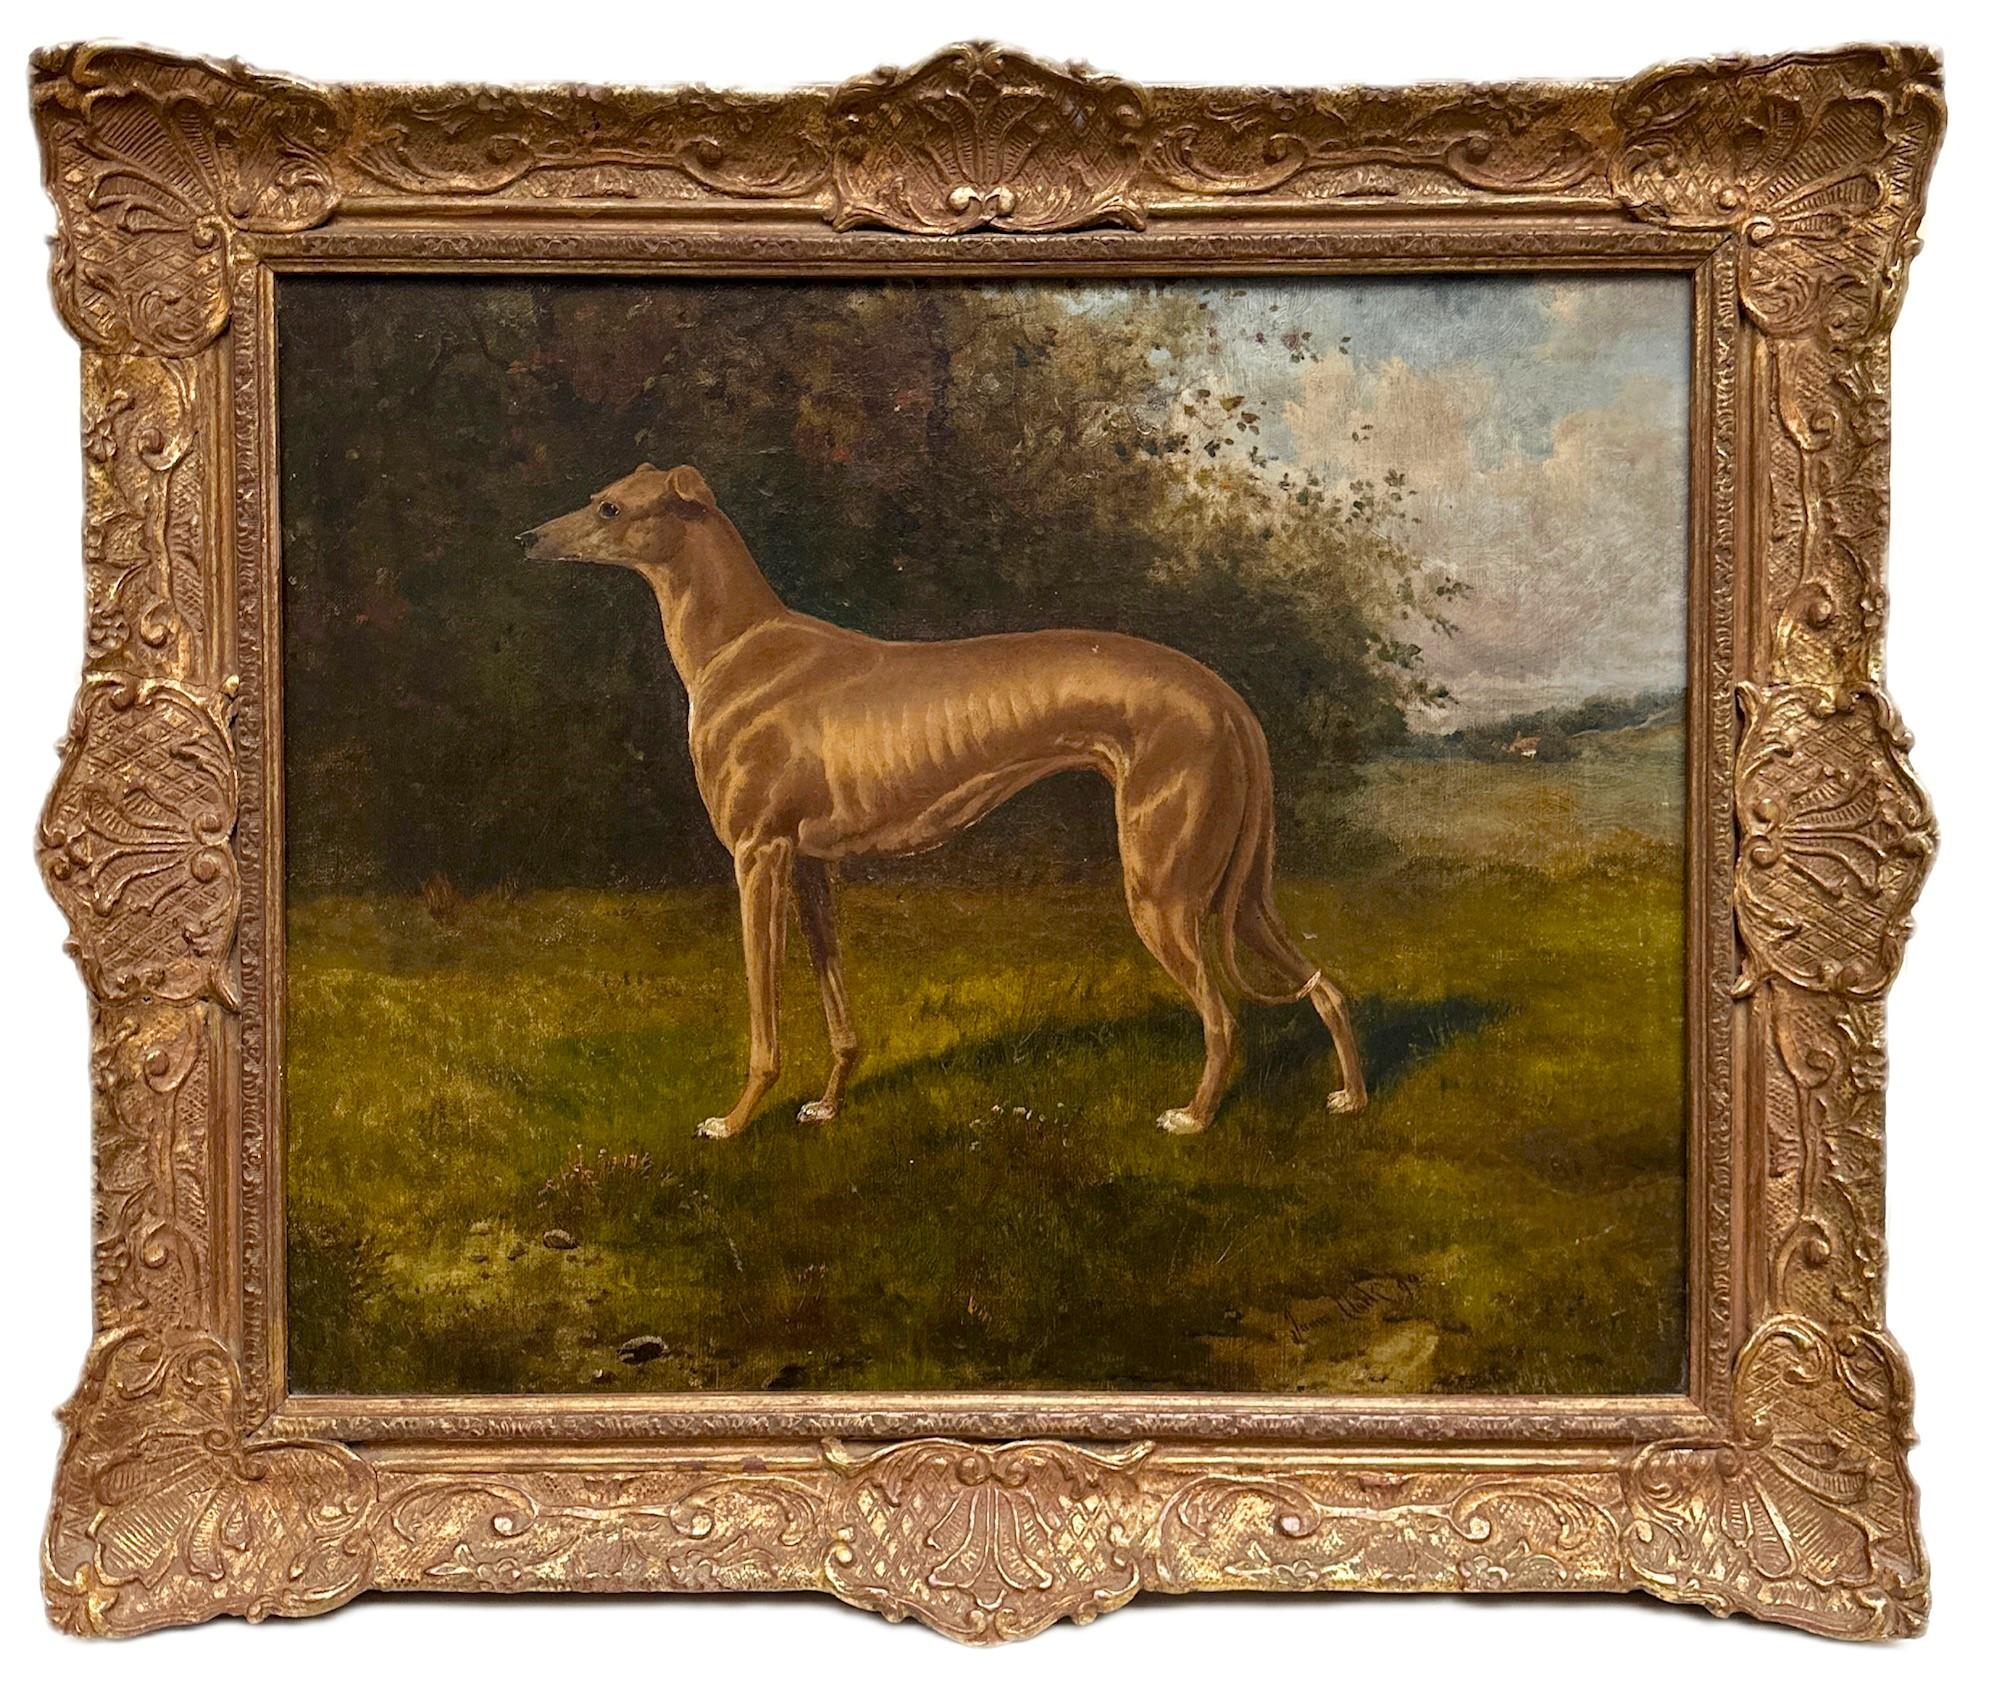 James Albert Clark Portrait Painting - A 19th century portrait of a greyhound dog in a verdant landscape, signed